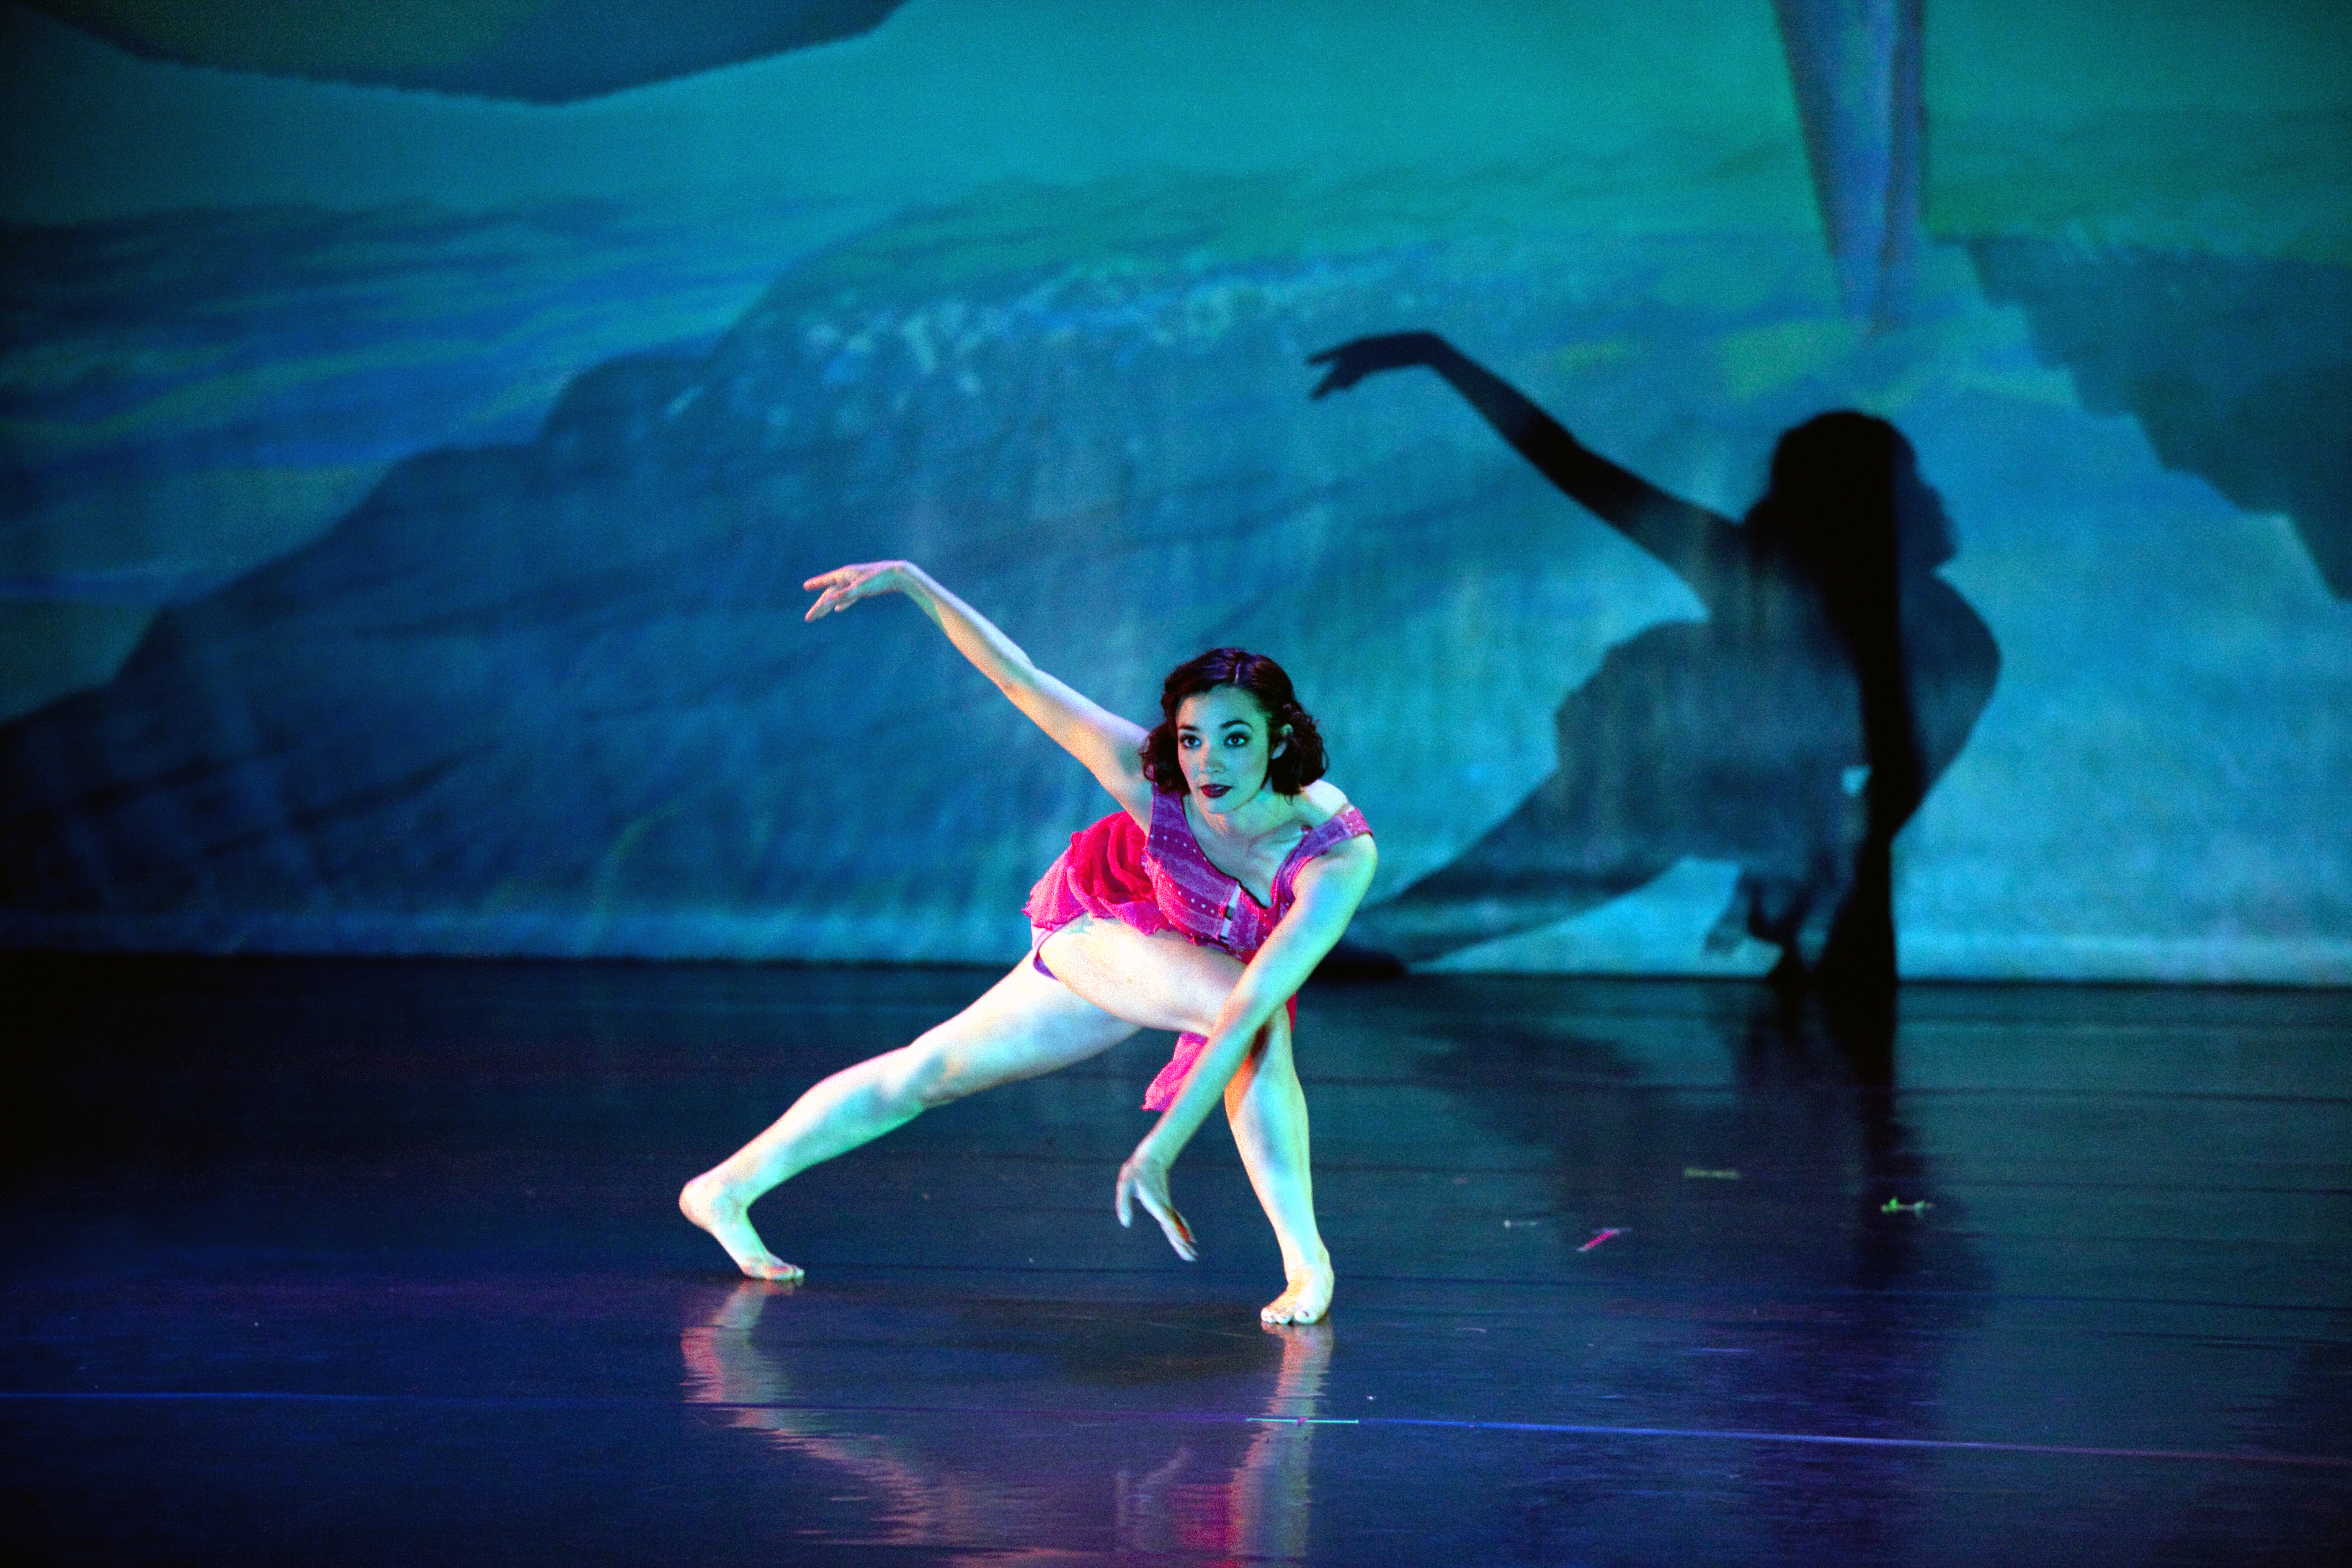 GW's Department of Theatre and Dance Presents "Spring DanceWorks," April 15-17 Production Features Internationally Acclaimed Guest Artists, Faculty and Student Choreographers